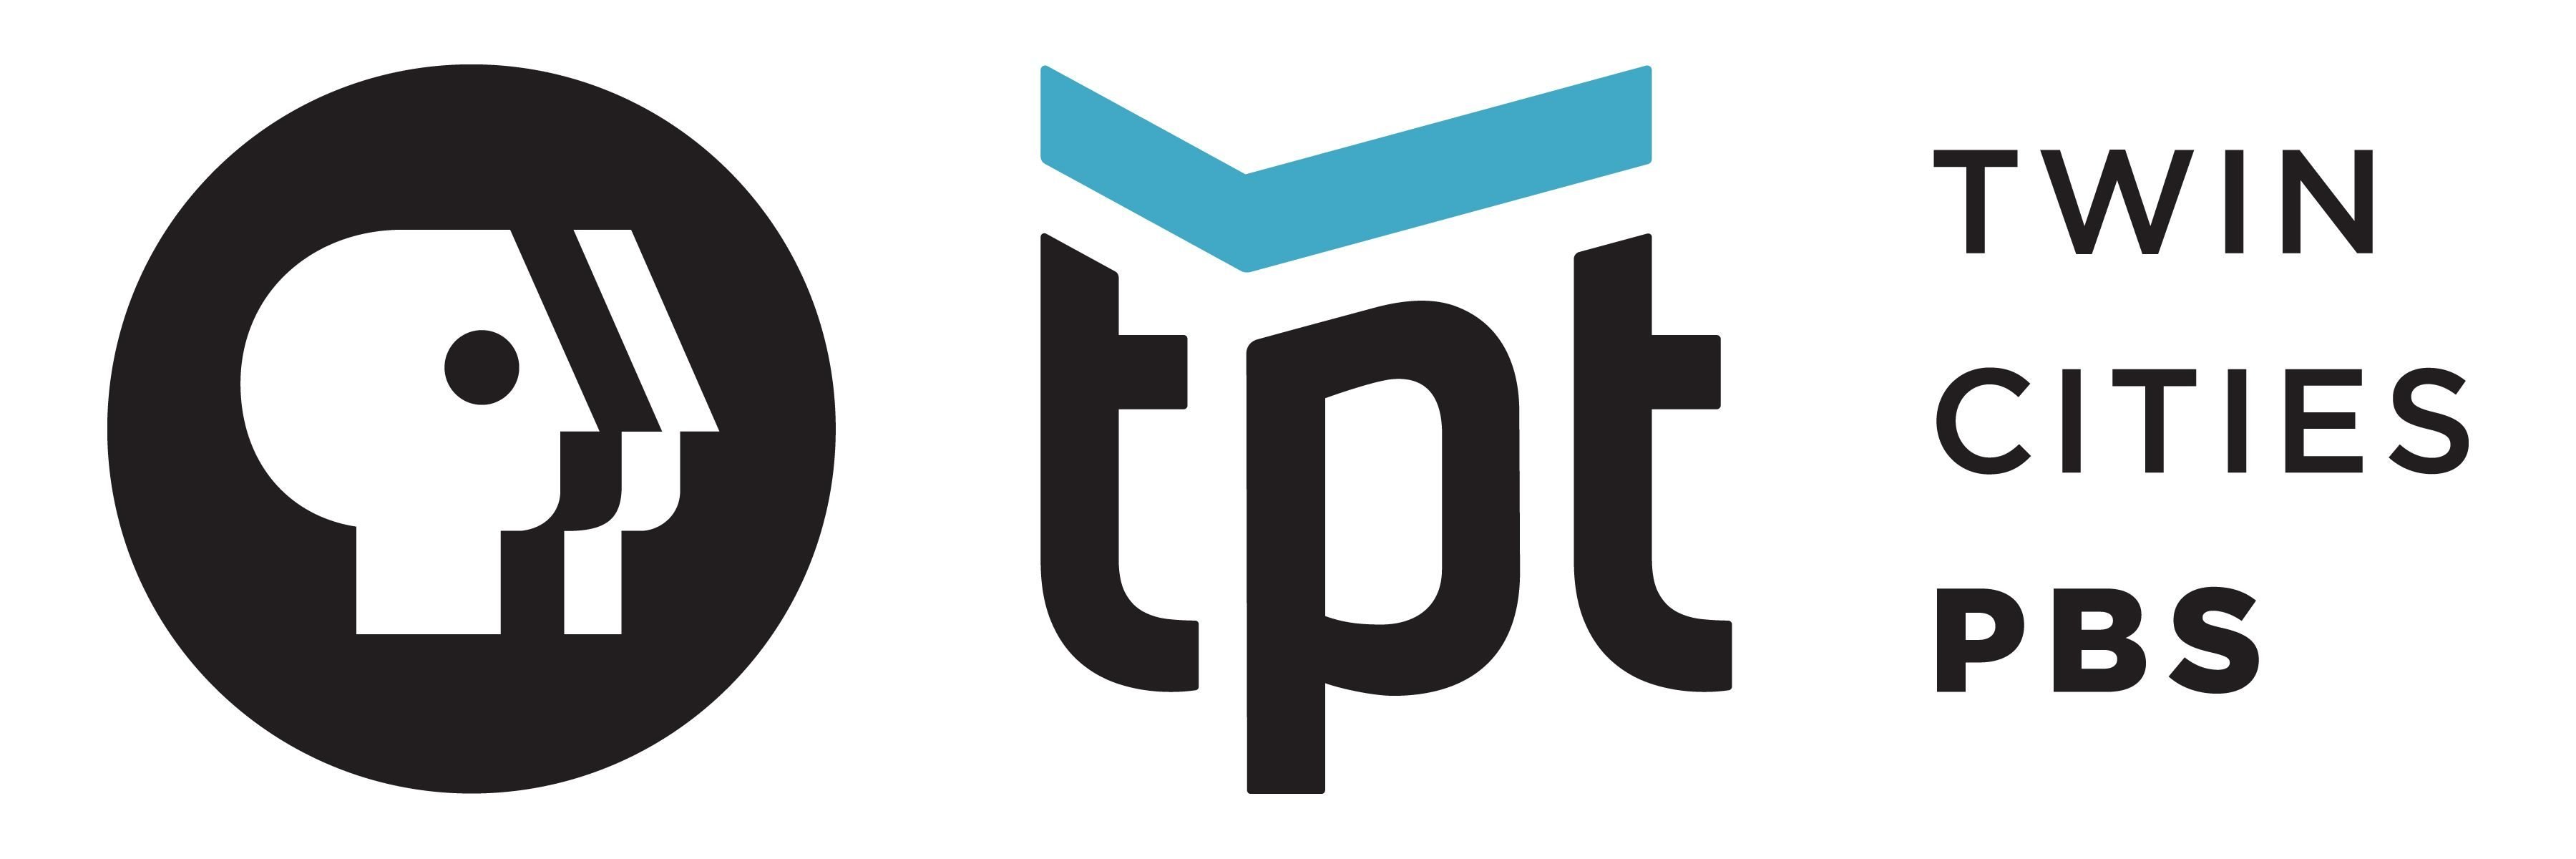 TV Schedule - Find dates and times for shows airing on TPT